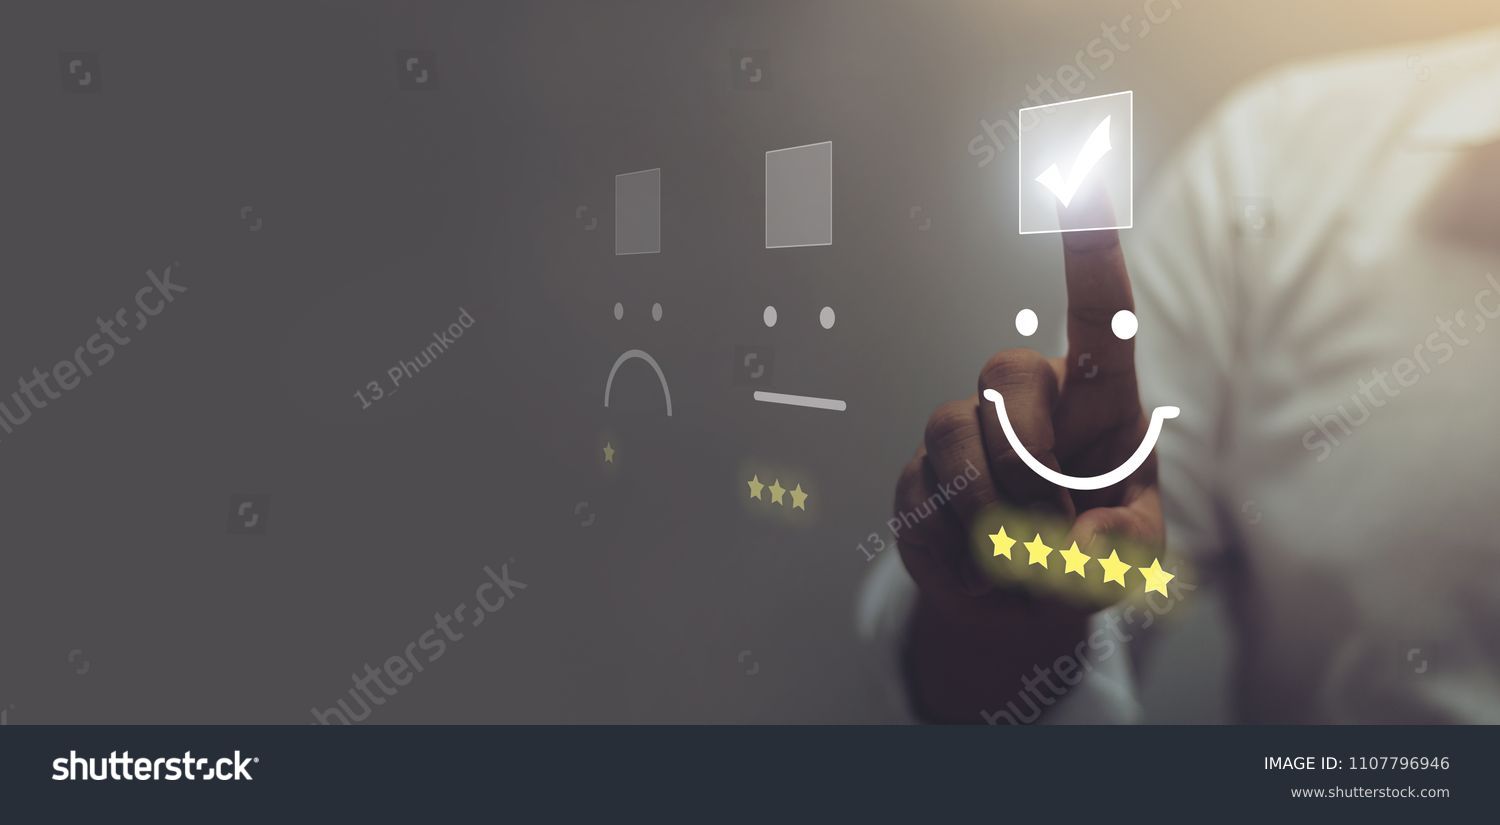 Businessman pressing smiley face emoticon on virtual touch screen. Customer service evaluation concept. #1107796946